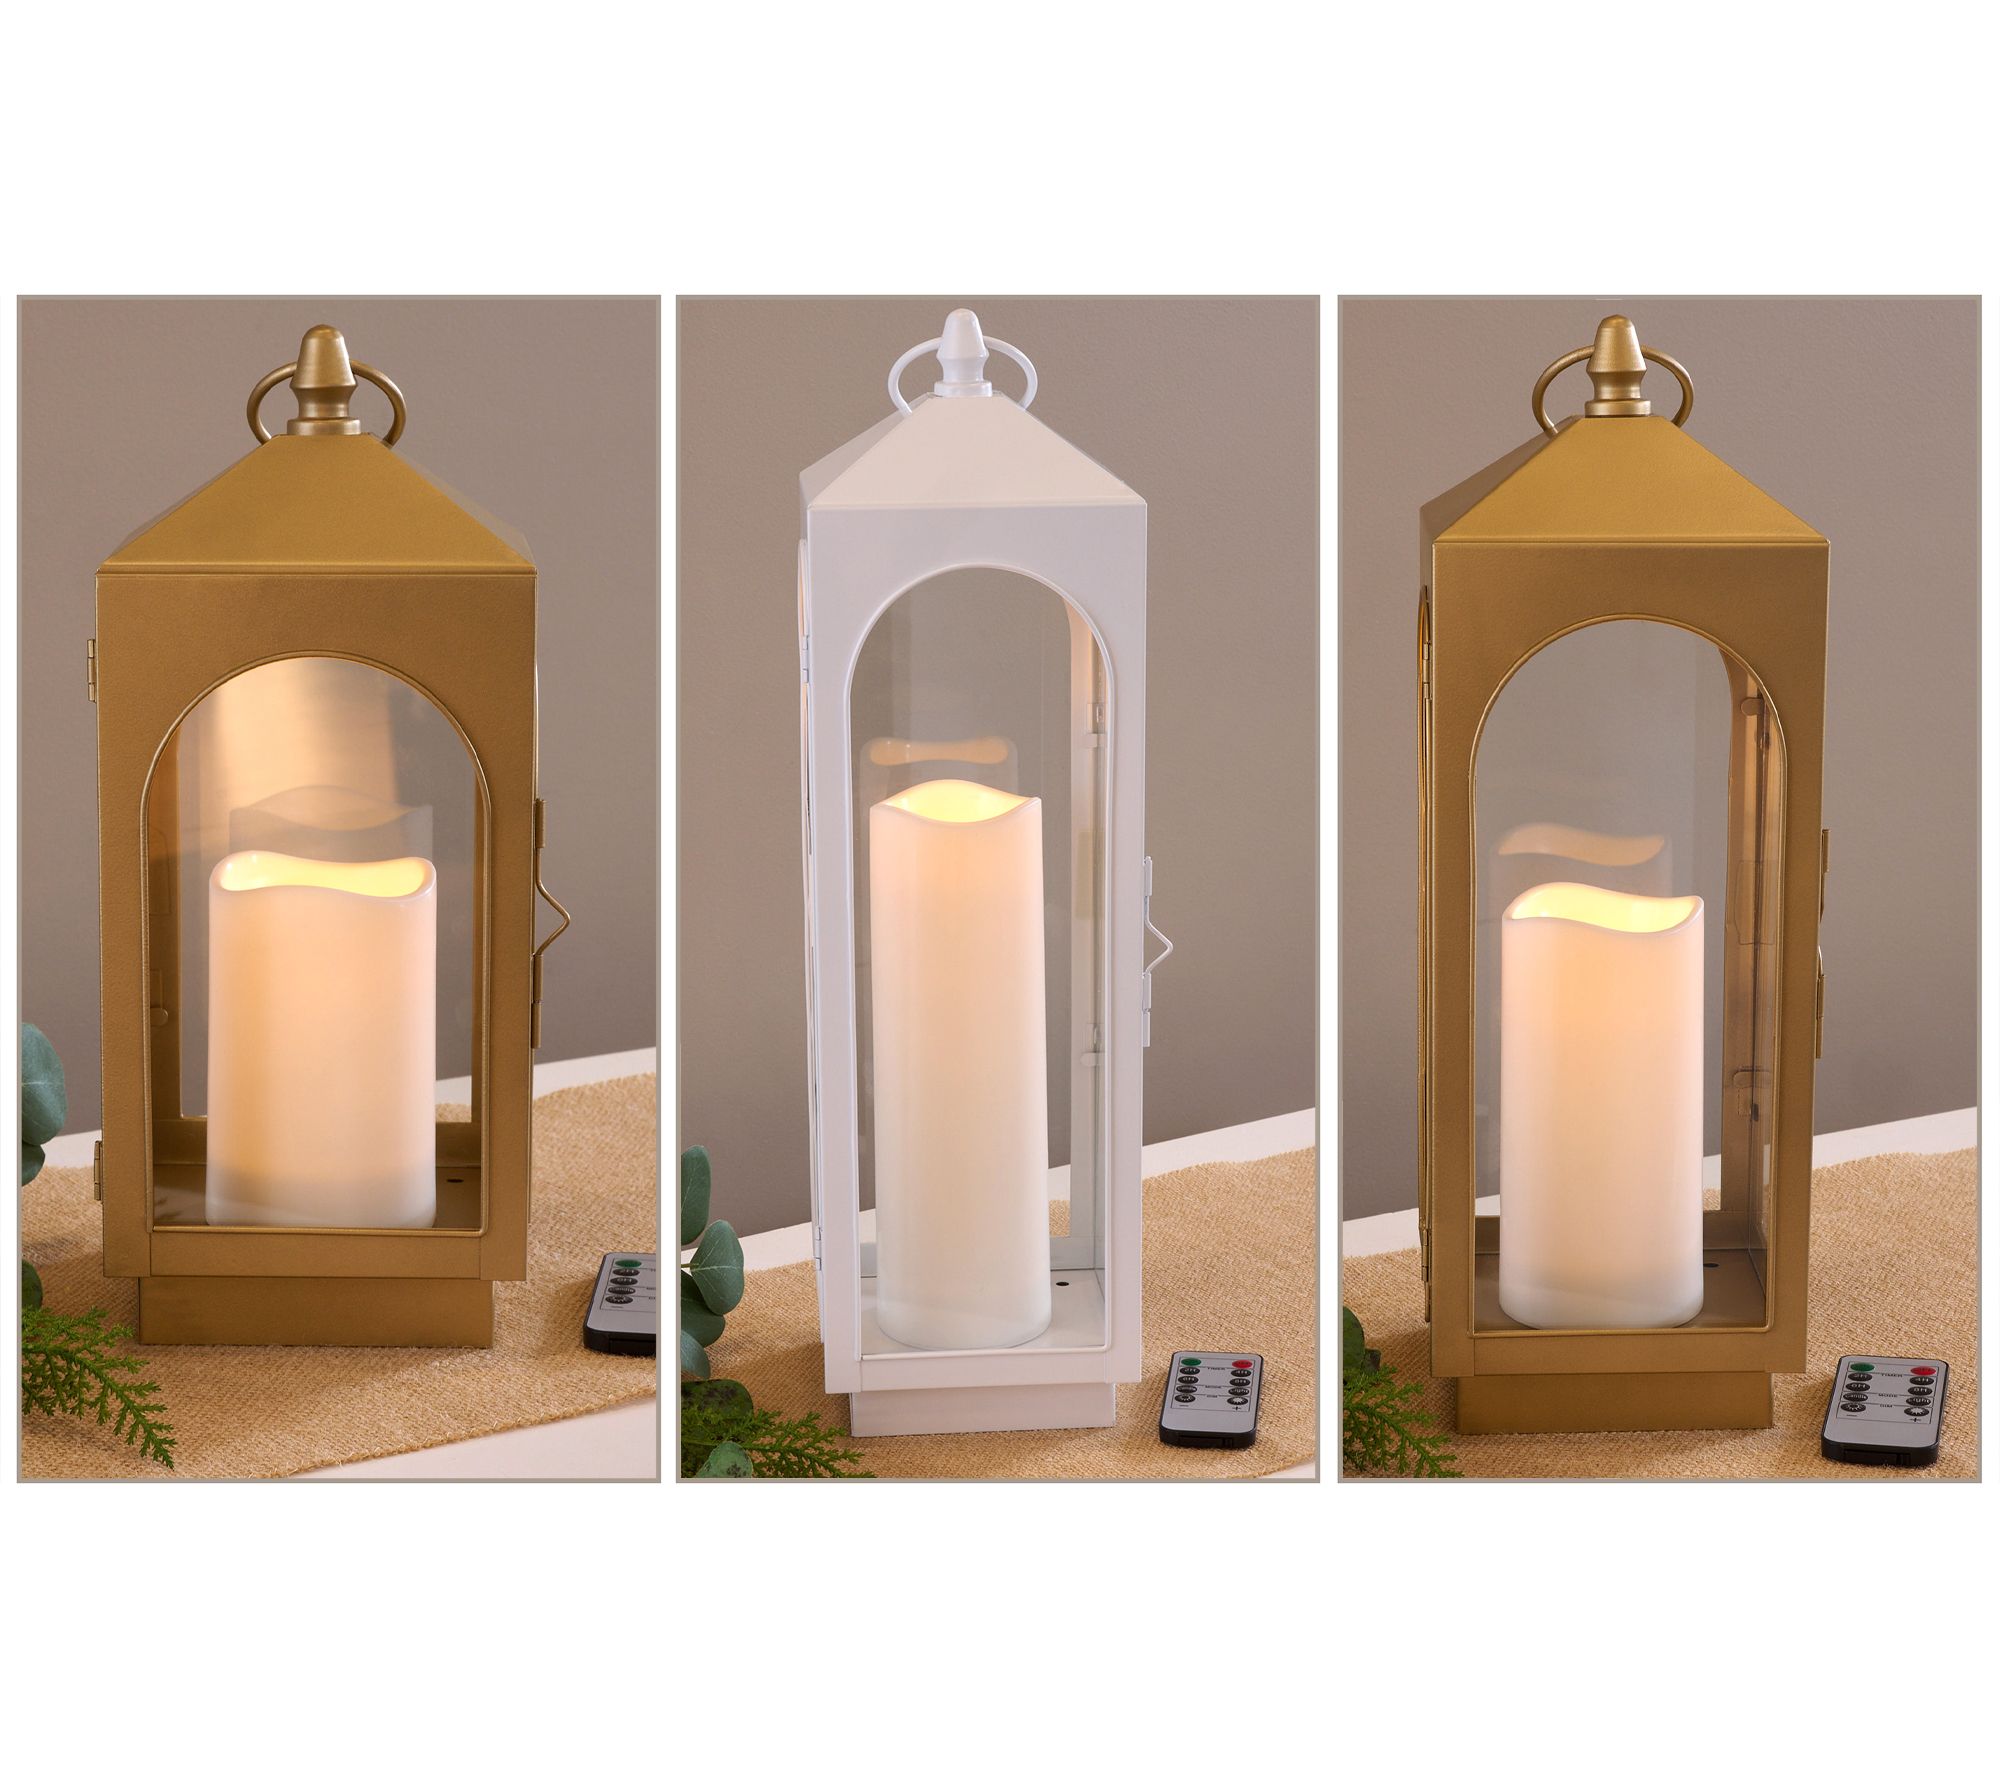 Home Reflections S/3 Indoor/Outdoor Mini Lanterns with Gift Boxes